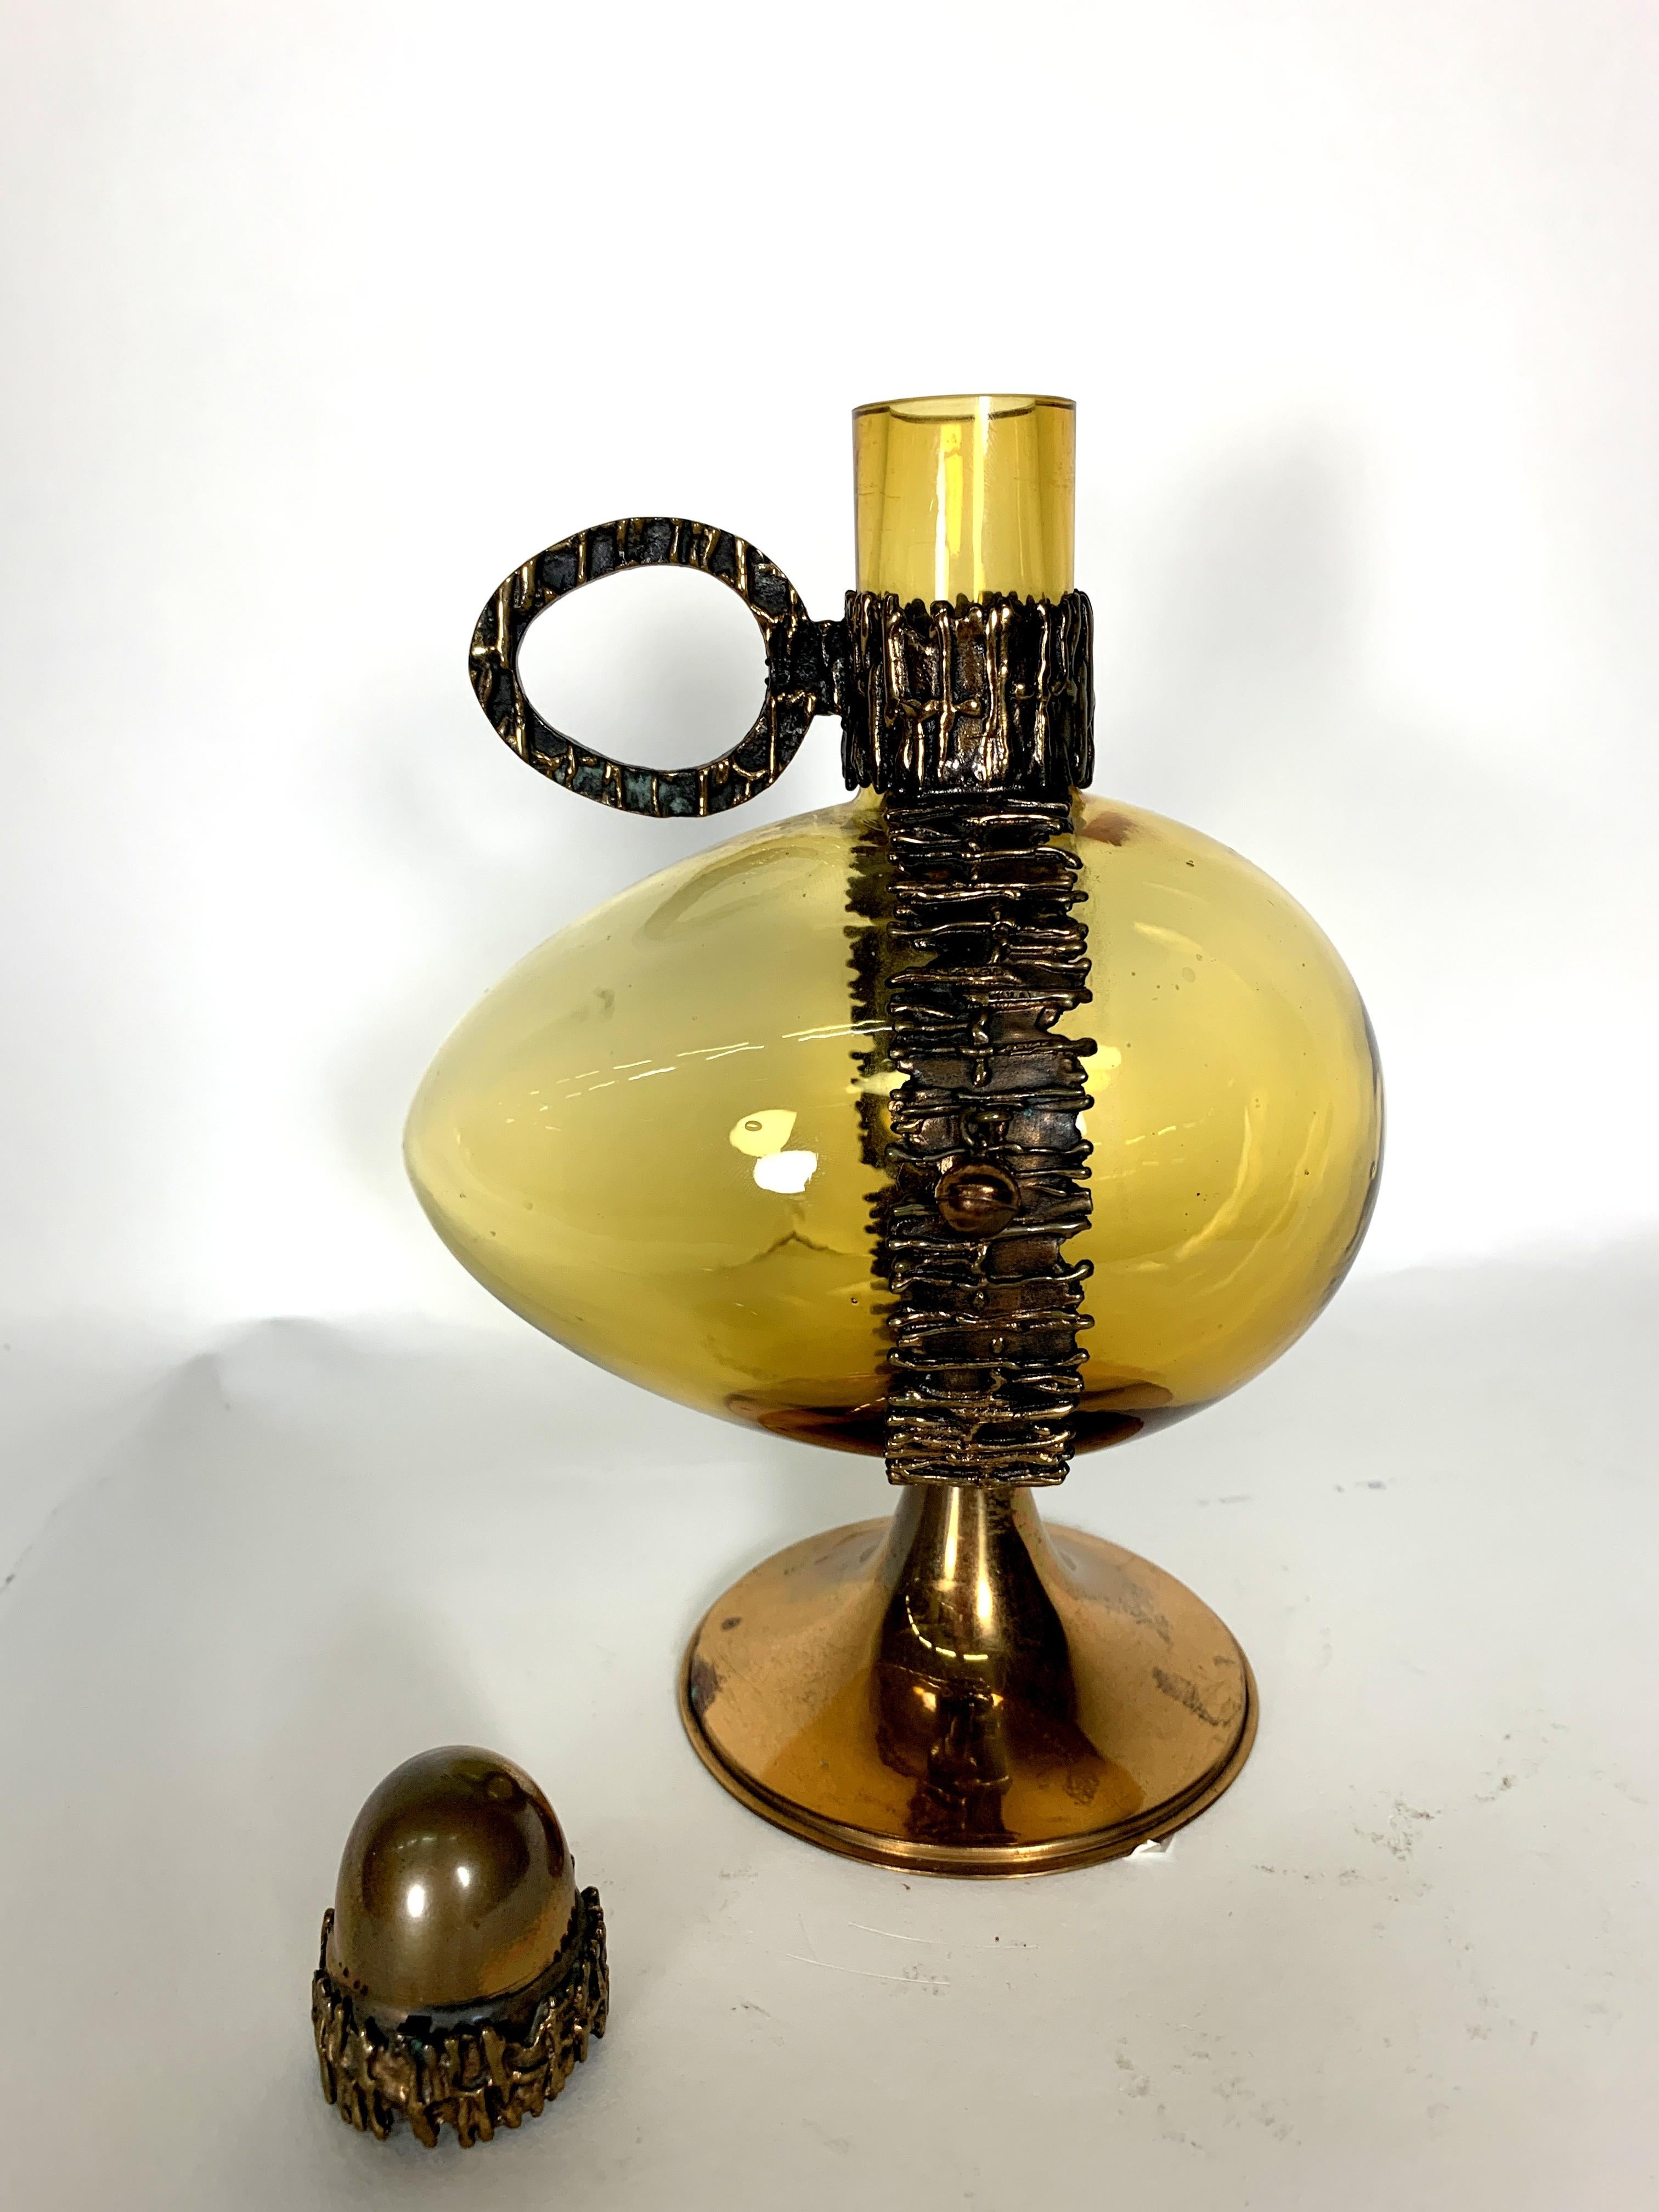 Mid-20th Century Brass and Colored Glass Liquor Glass, 1960s, from Pentti Sarpaneva, Finland For Sale